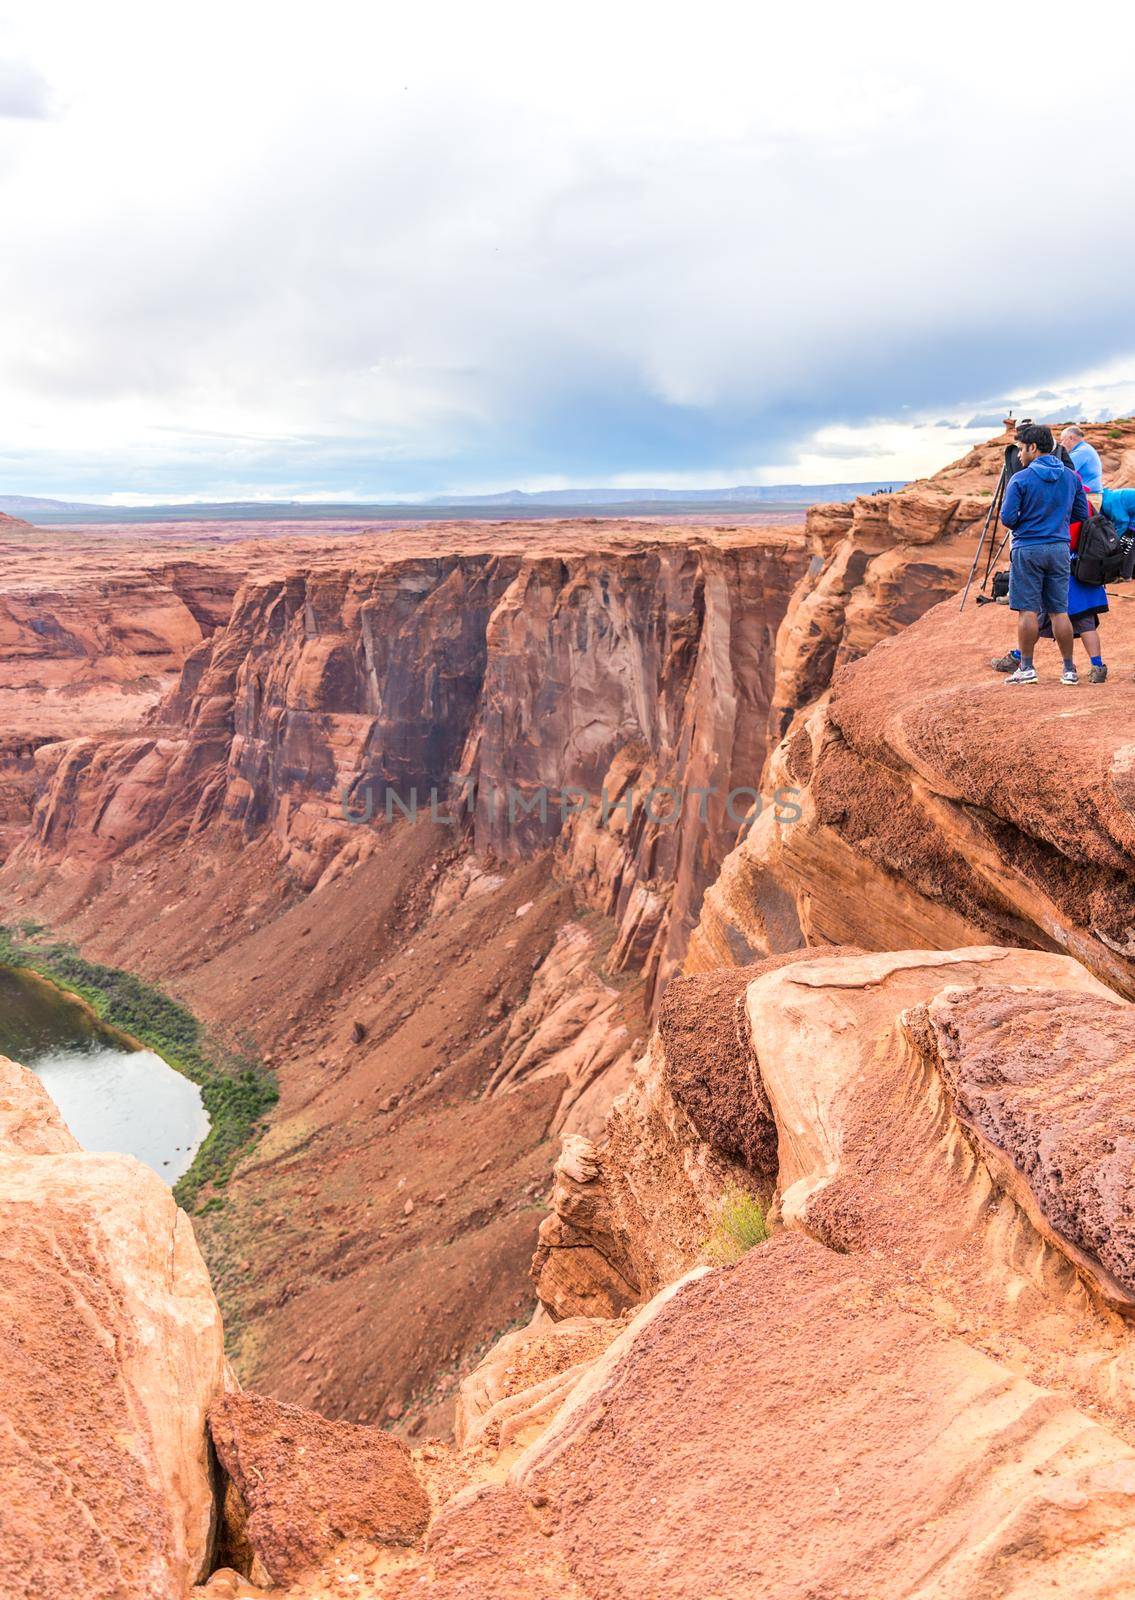 PAGE, ARIZONA - MAY 25: Hikers at Horseshoe Bend on May 25, 2015 in Page AZ,USA. Thousands of people from all over the world visit this unique place every year.